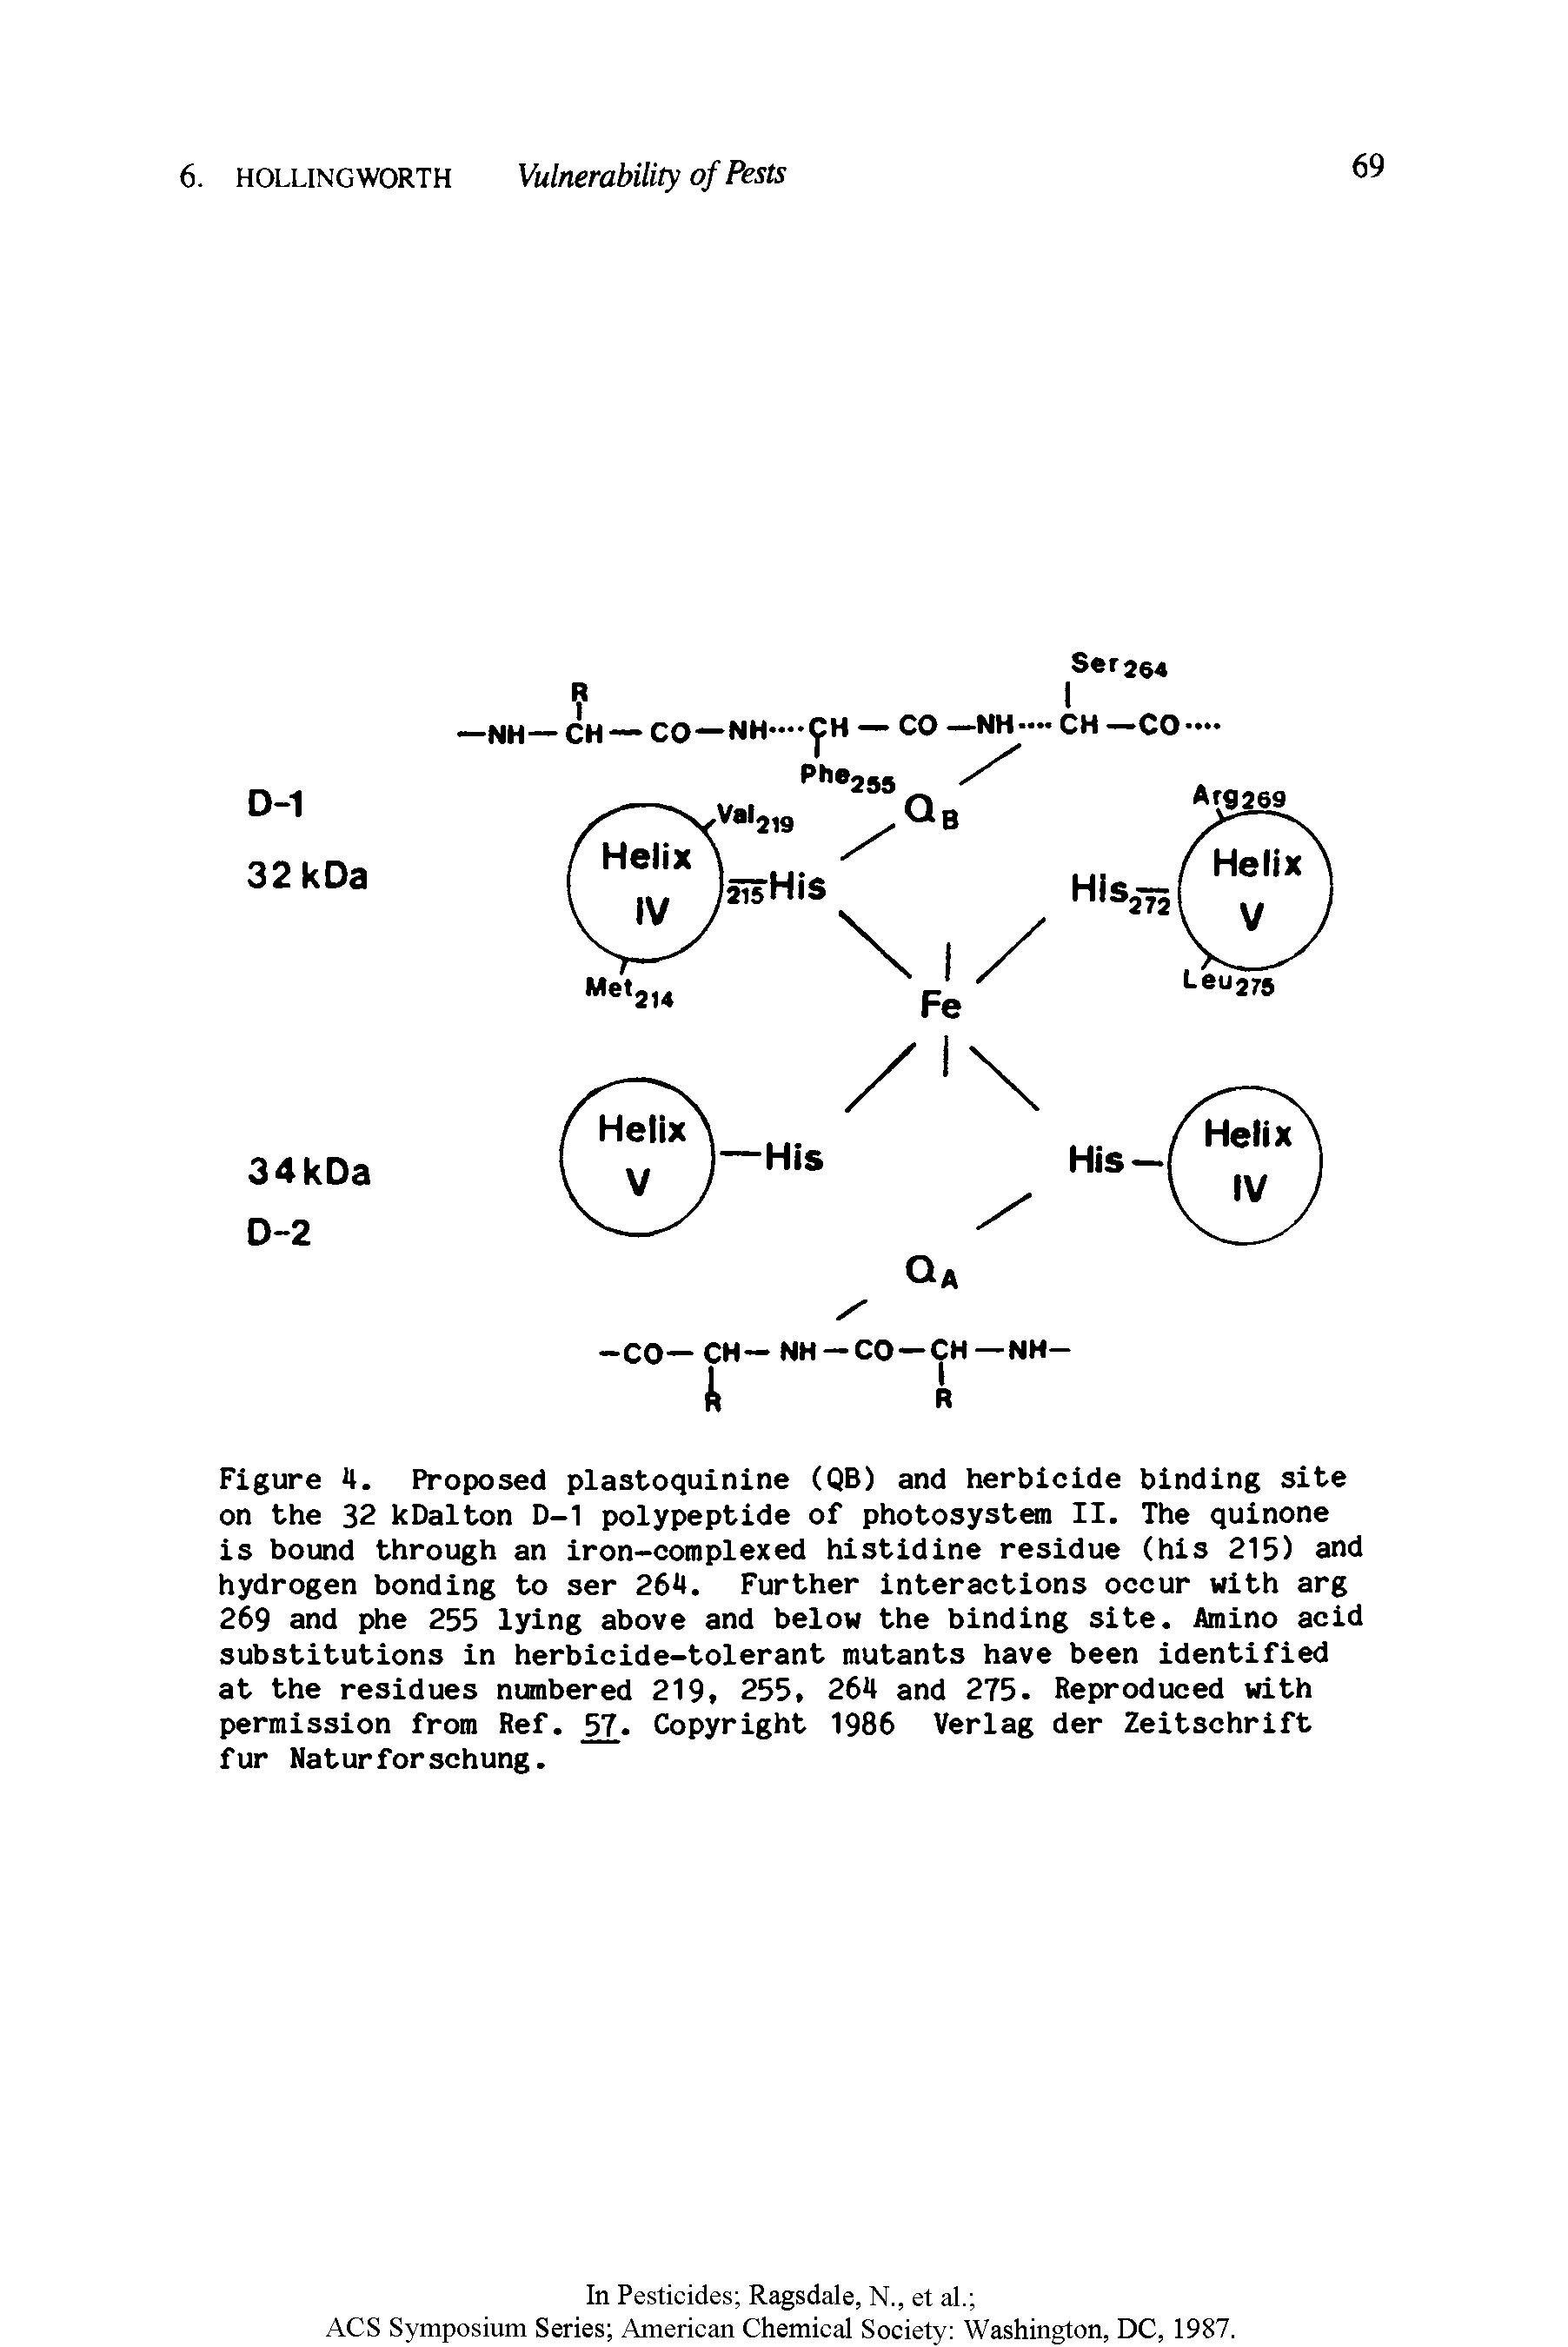 Figure 4. Proposed plastoquinine (QB) and herbicide binding site on the 32 kDalton D-1 polypeptide of photosystem II. The quinone is bound through an iron-complexed histidine residue (his 215) and hydrogen bonding to ser 264. Further interactions occur with arg 269 and phe 255 lying above and below the binding site. Amino acid substitutions in herbicide-tolerant mutants have been identified at the residues numbered 219. 255, 264 and 275. Reproduced with permission from Ref. 57. Copyright 1986 Verlag der Zeitschrift fur Naturforschung.